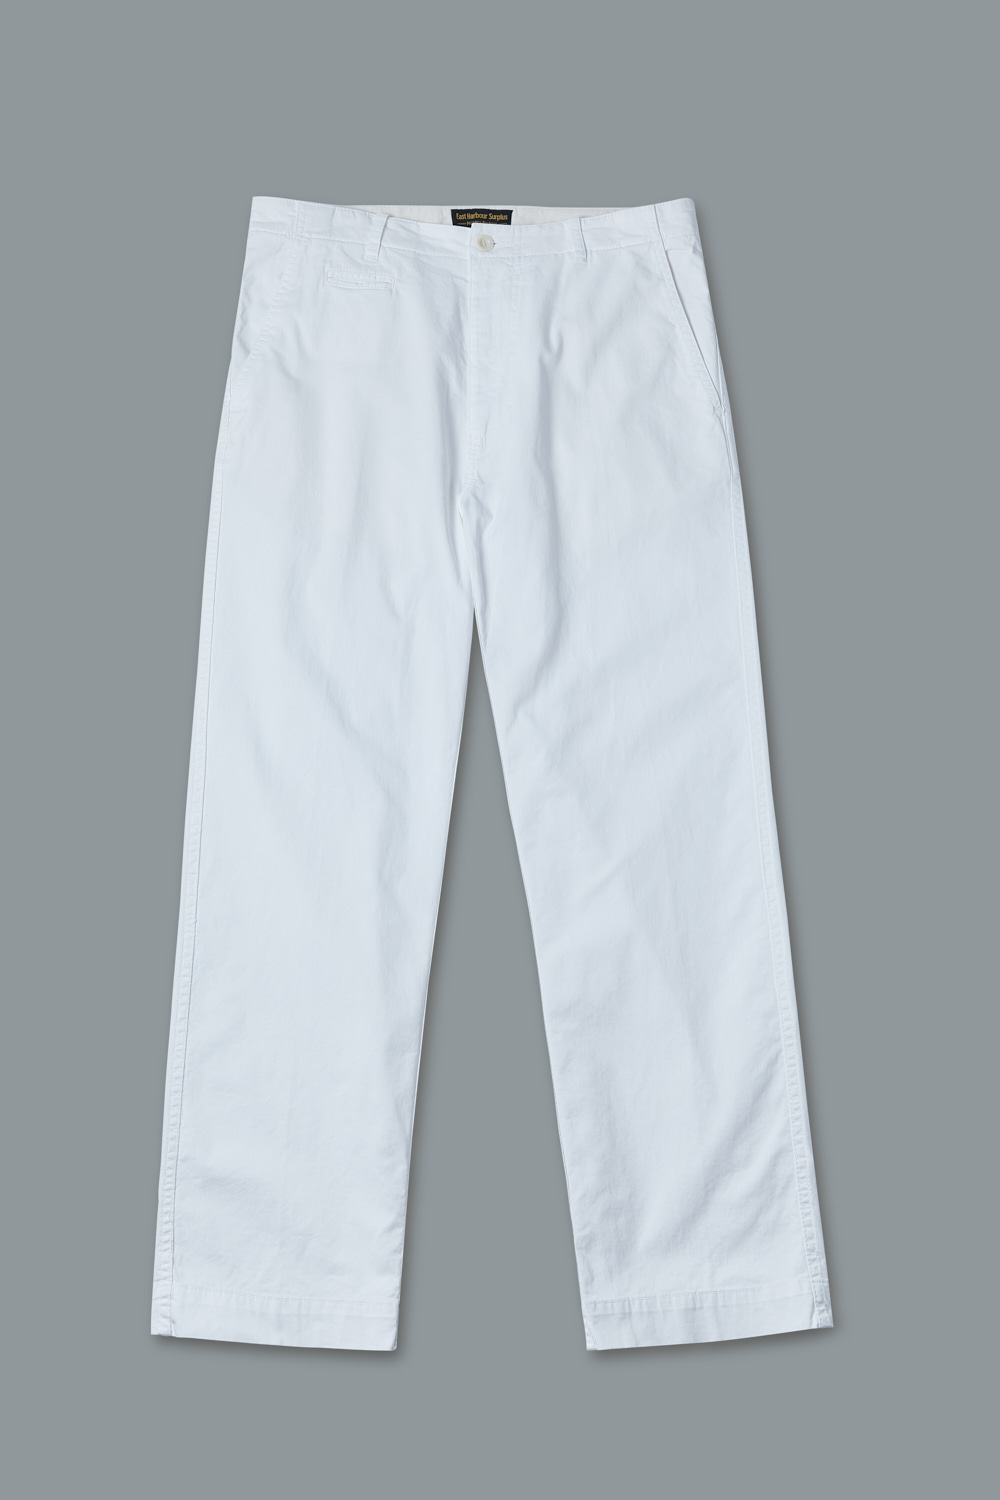 [23 S/S]WIDE CHINO WHITE EAST HARBOUR SURPLUS(이스트하버서플러스)